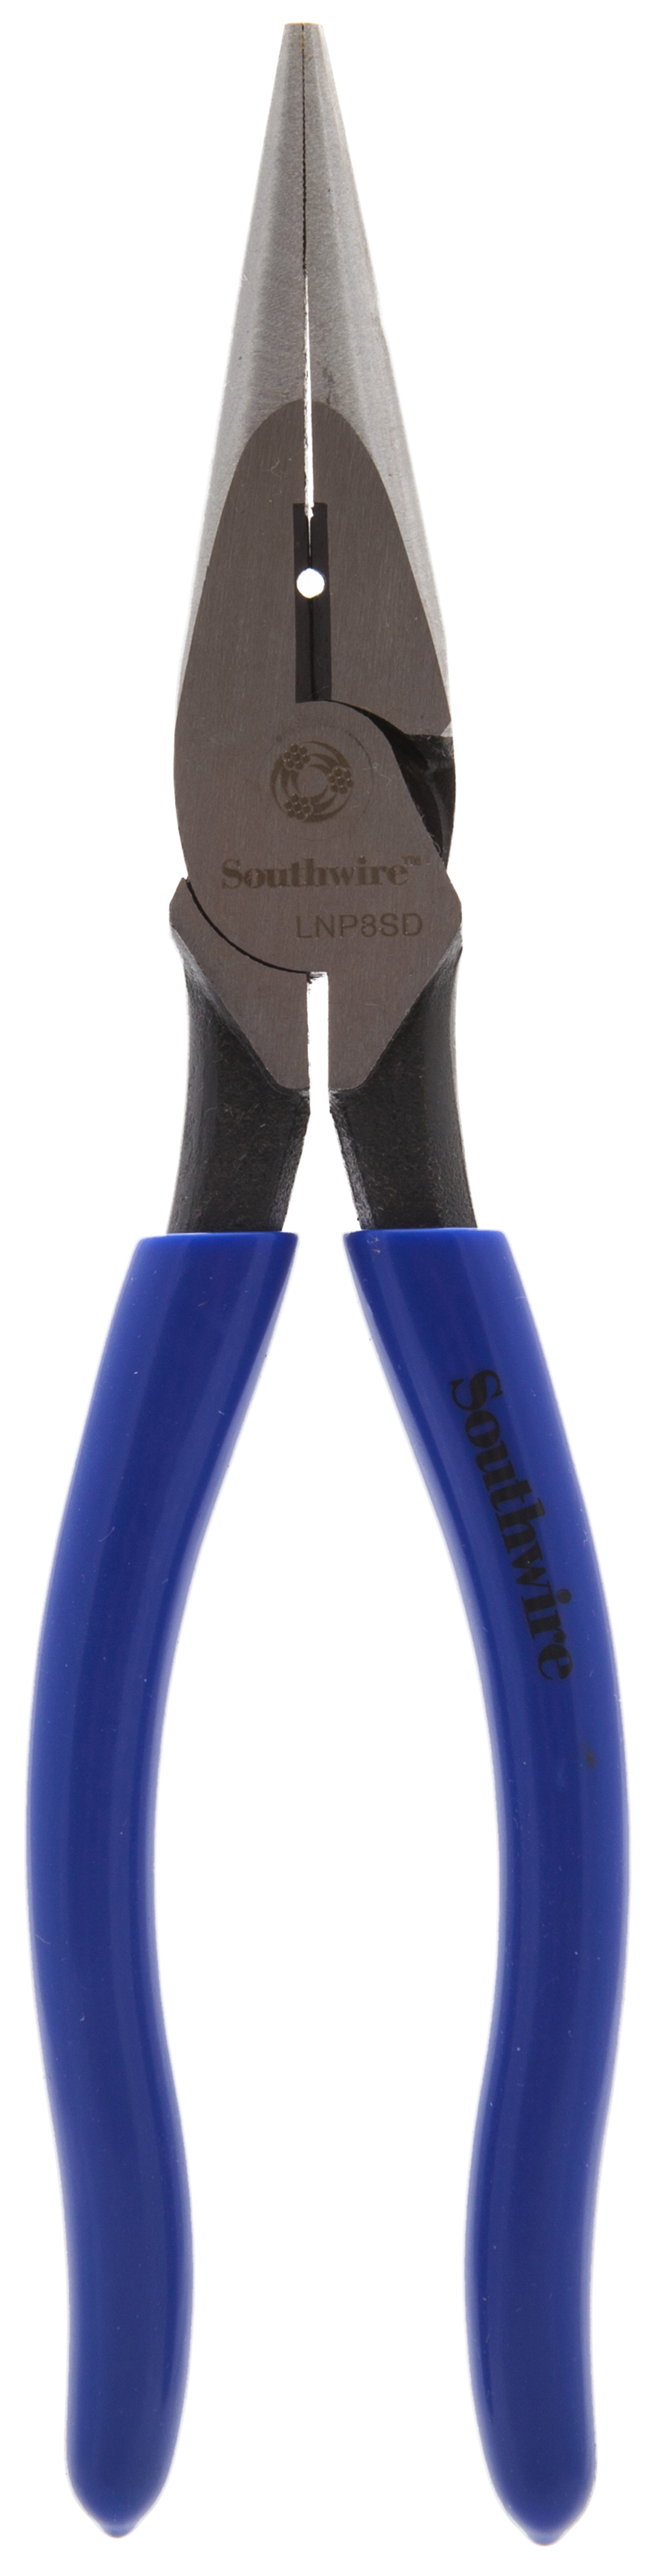 The 8" Heavy Duty Long Nose Pliers w/ Dipped Handles are durable, high-performing long nose pliers that are built from forged steel. Designed to reach tight spaces. The hi-leverage, hot-riveted joint is guaranteed to provide long-lasting durability a...